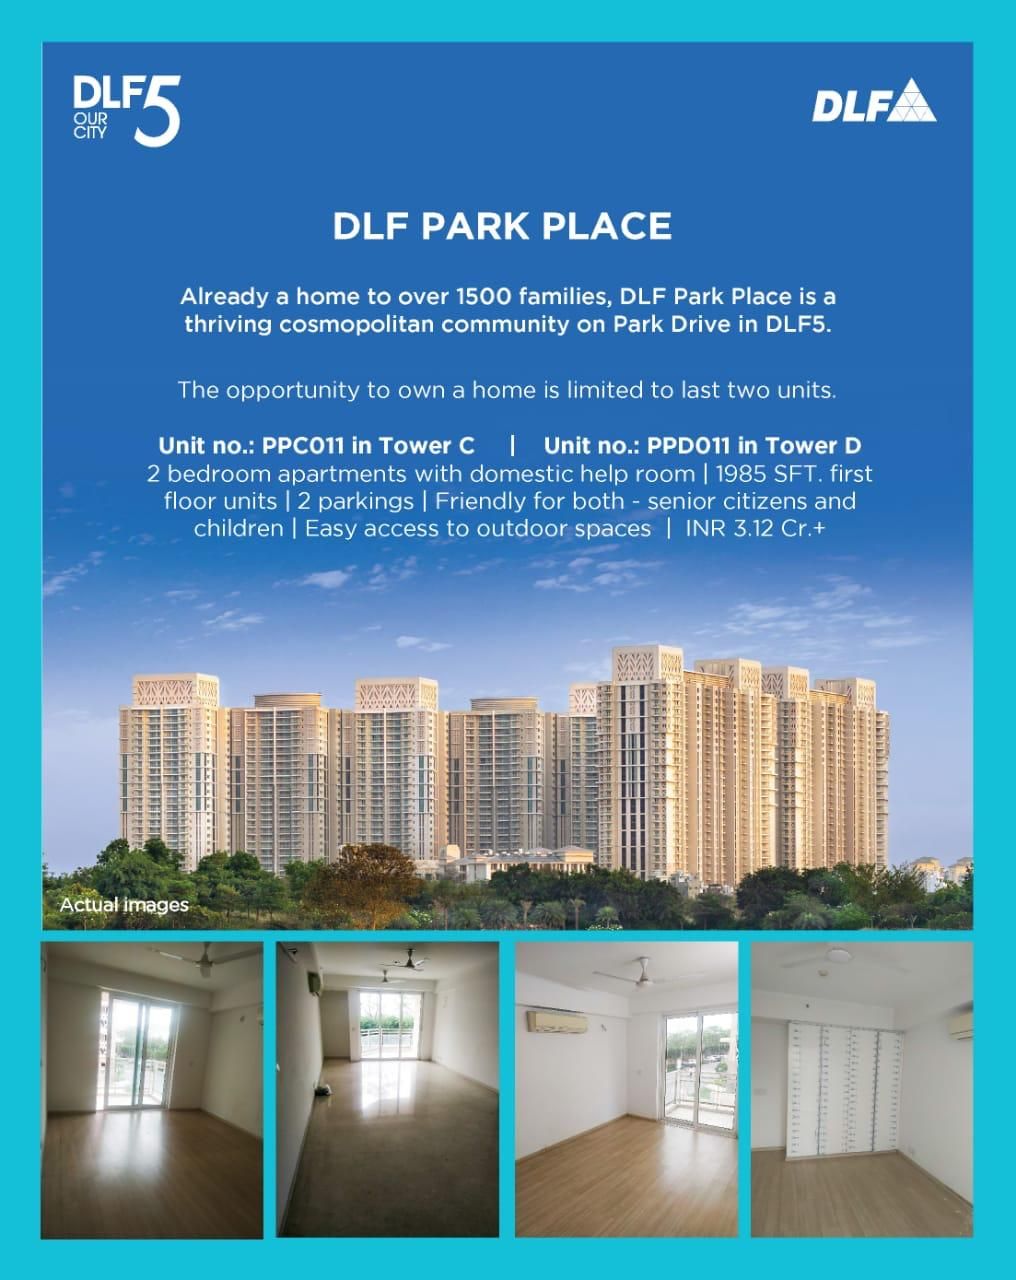 The opportunity to own a home is limited to last two units at DLF Park Place in Gurgaon